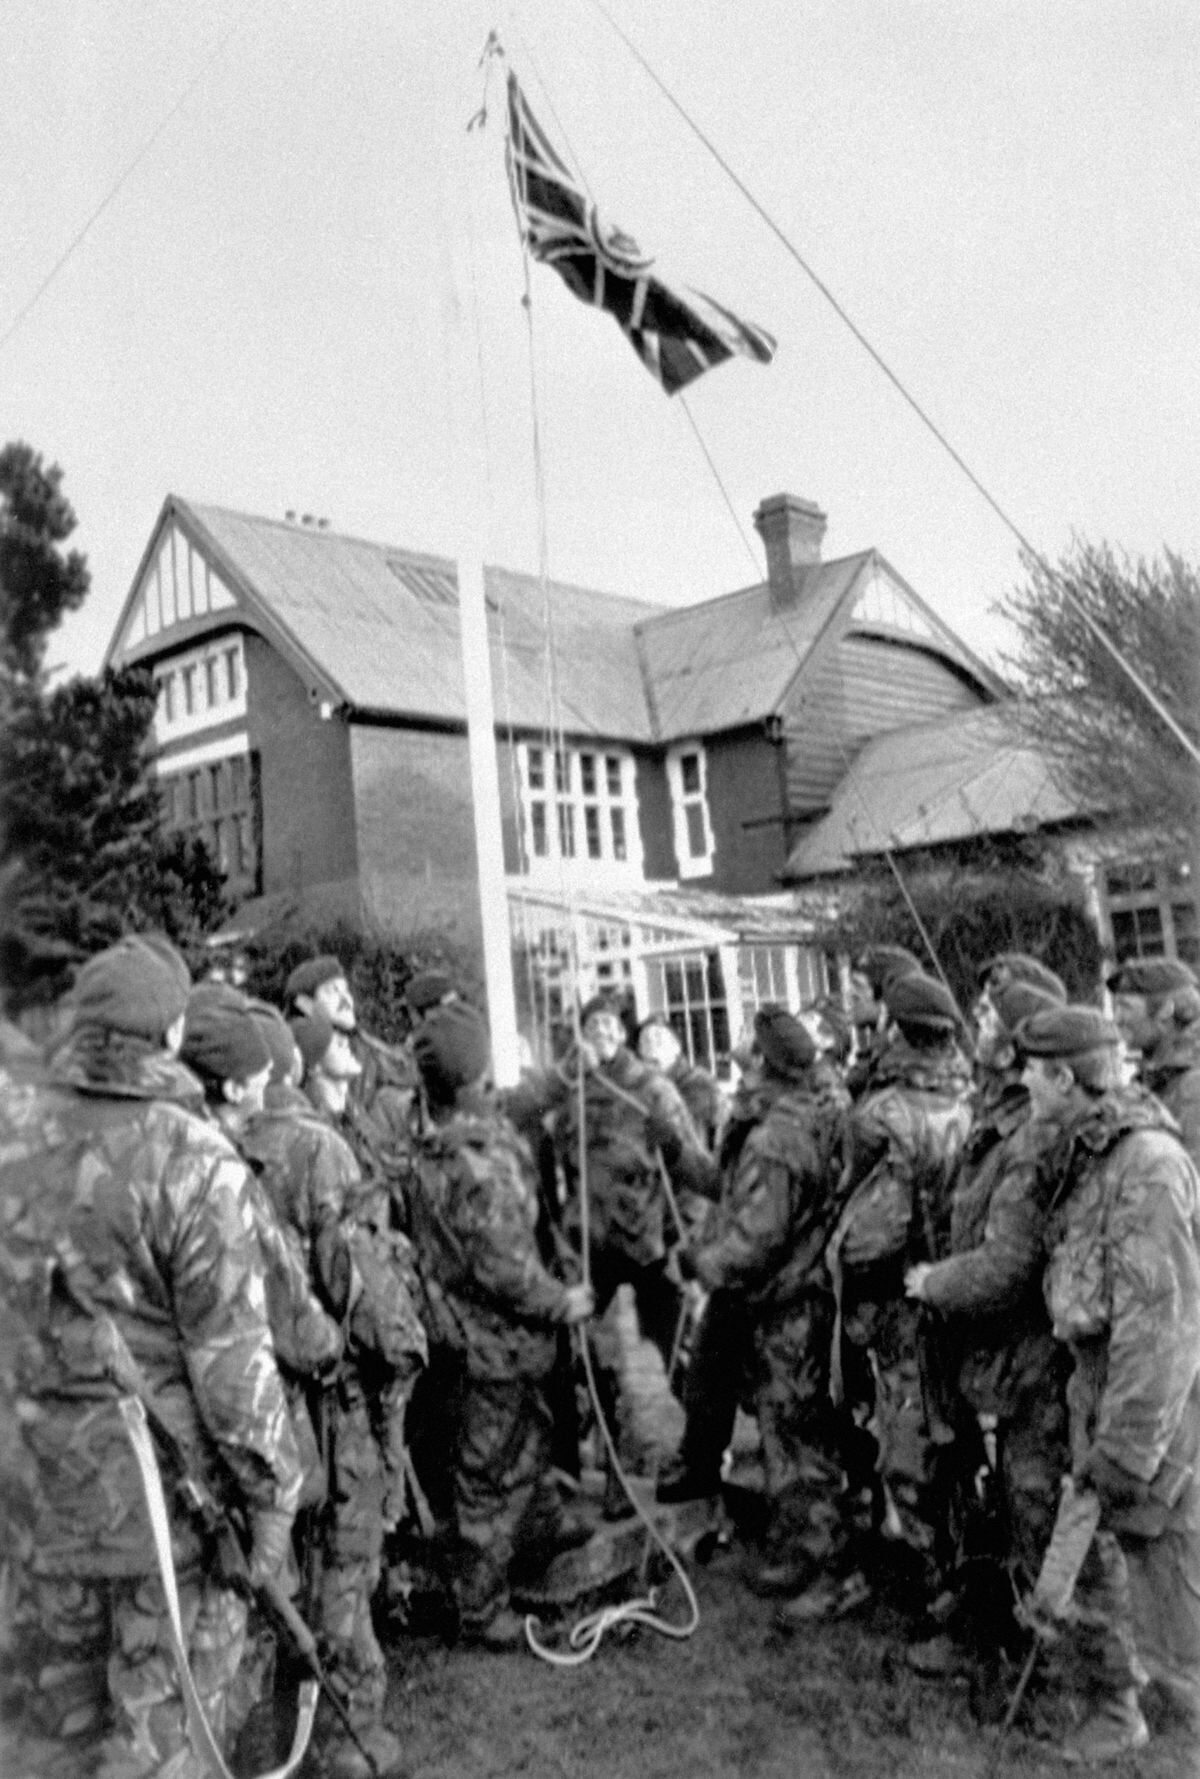 A British flag is raised in victory